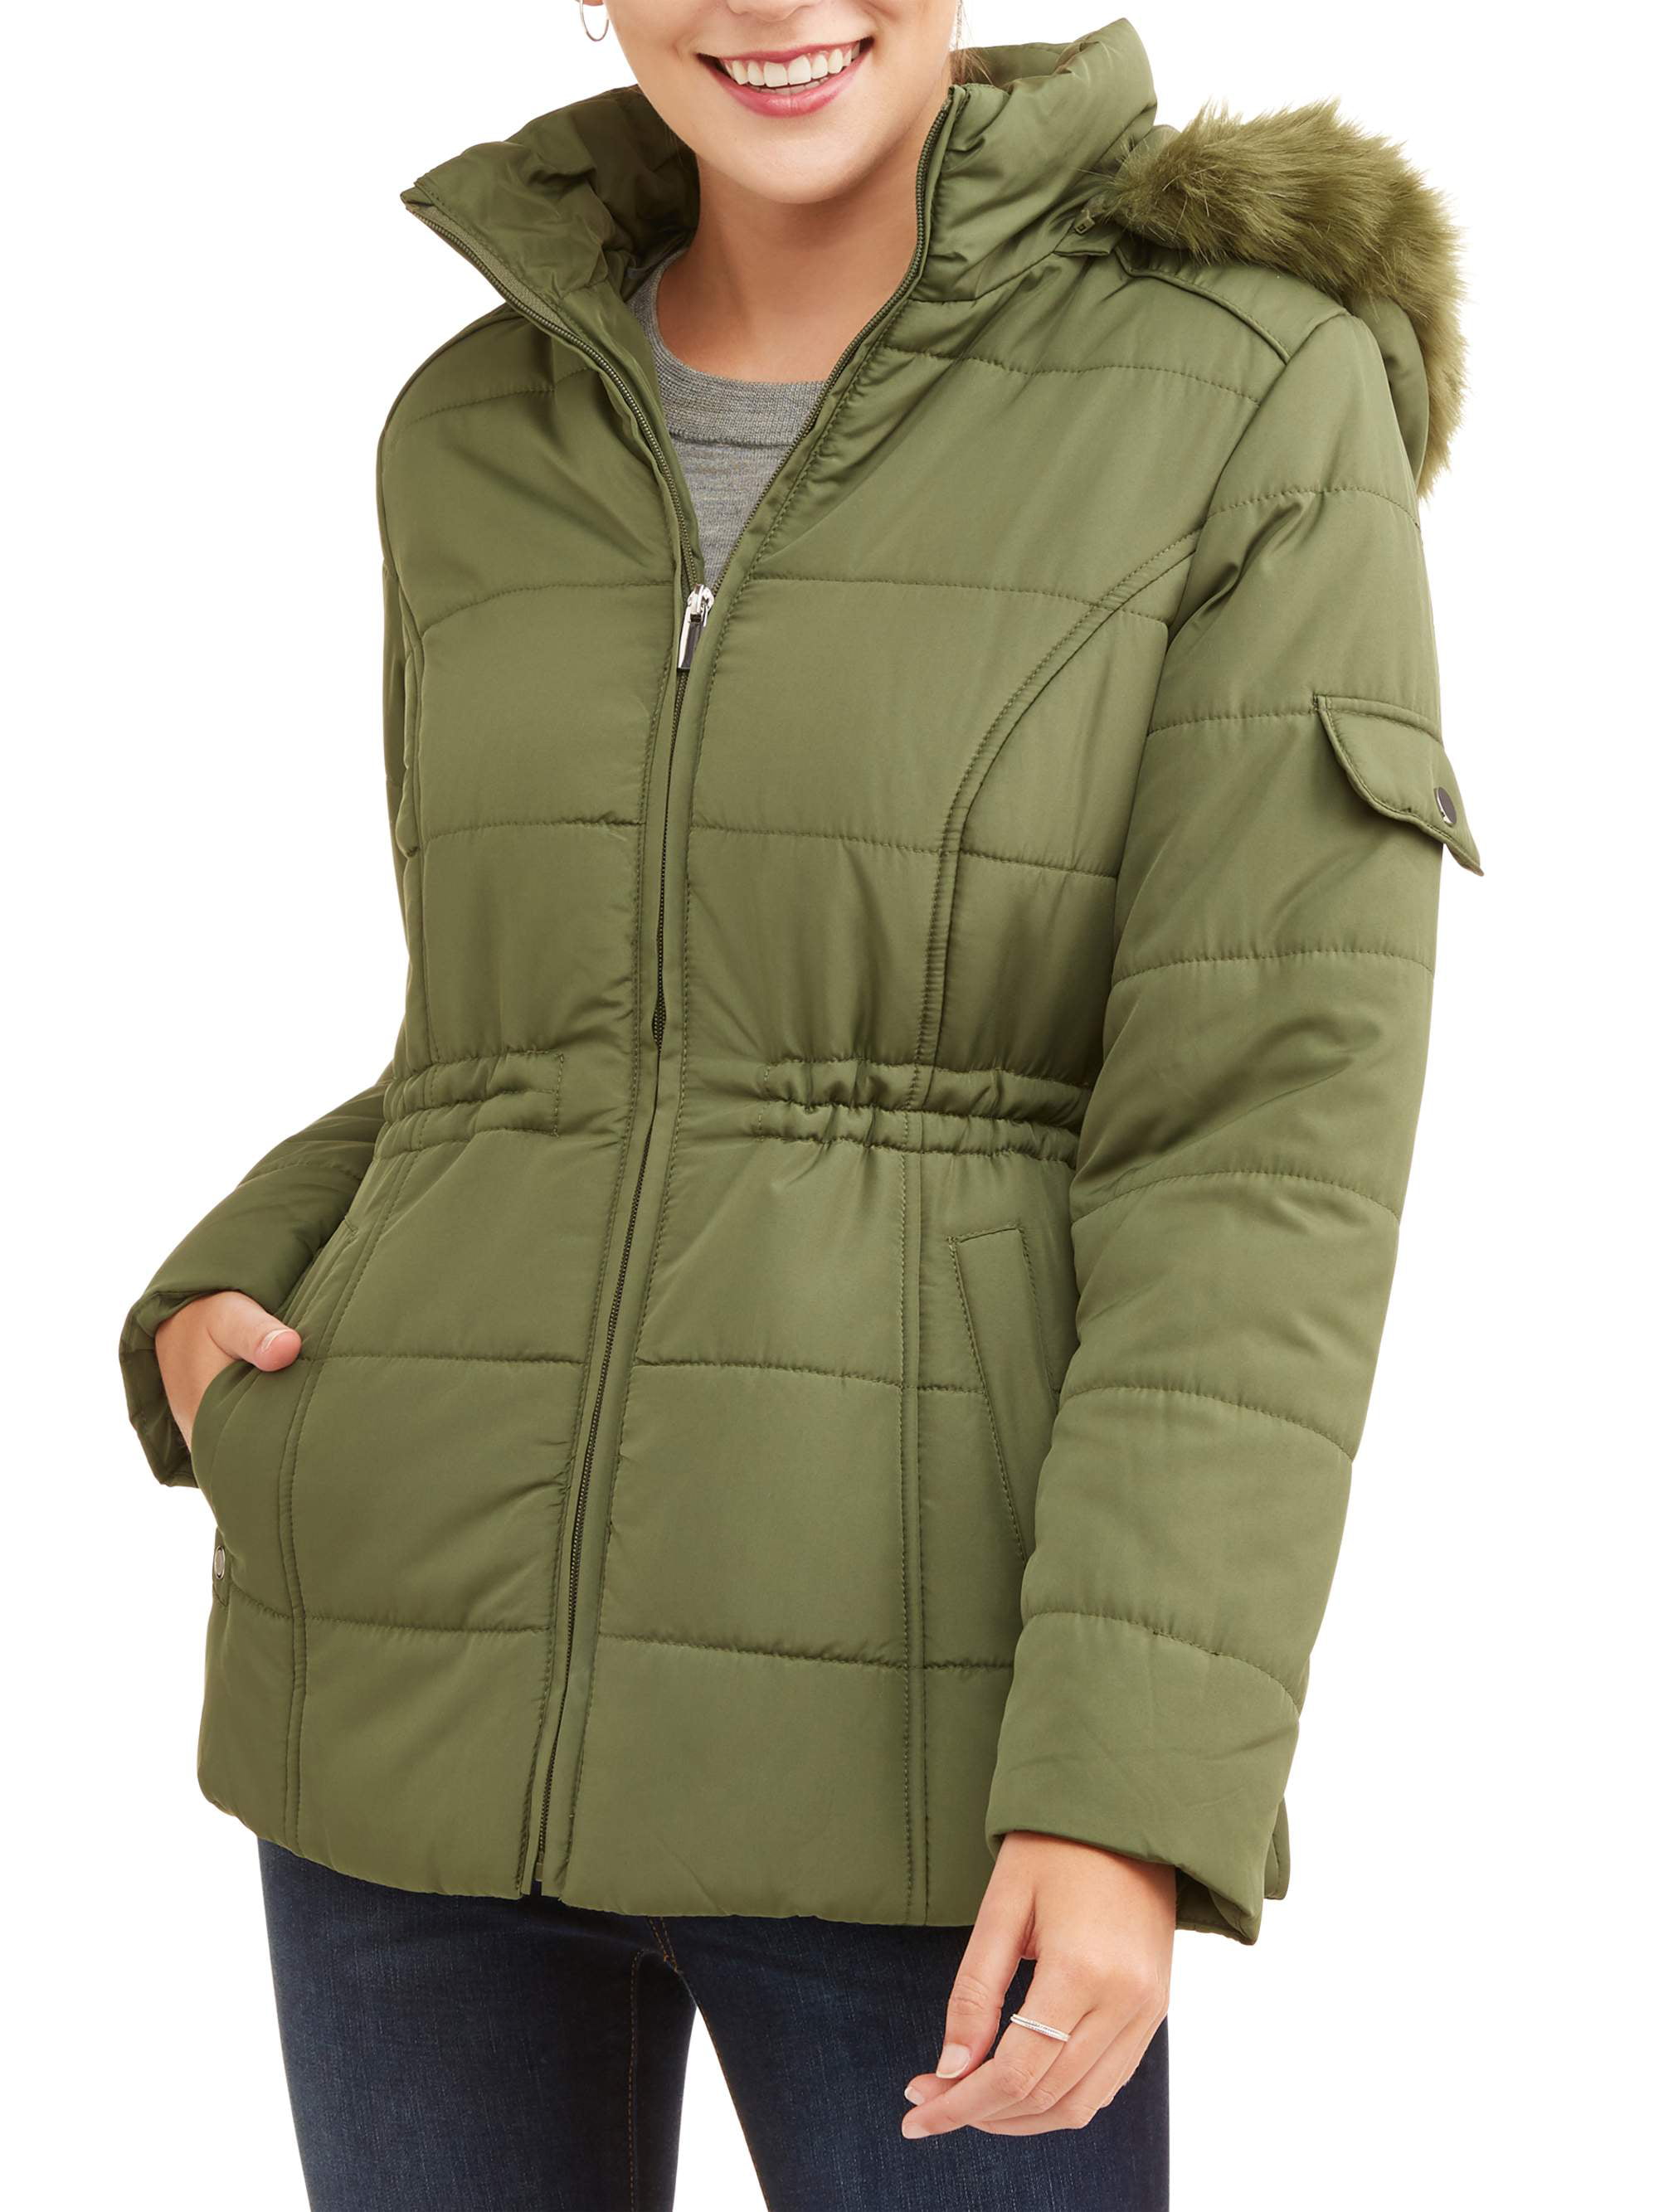 WEATHER TAMER - Women's Quilted Puffer Jacket with Faux Fur-Trim Hood ...